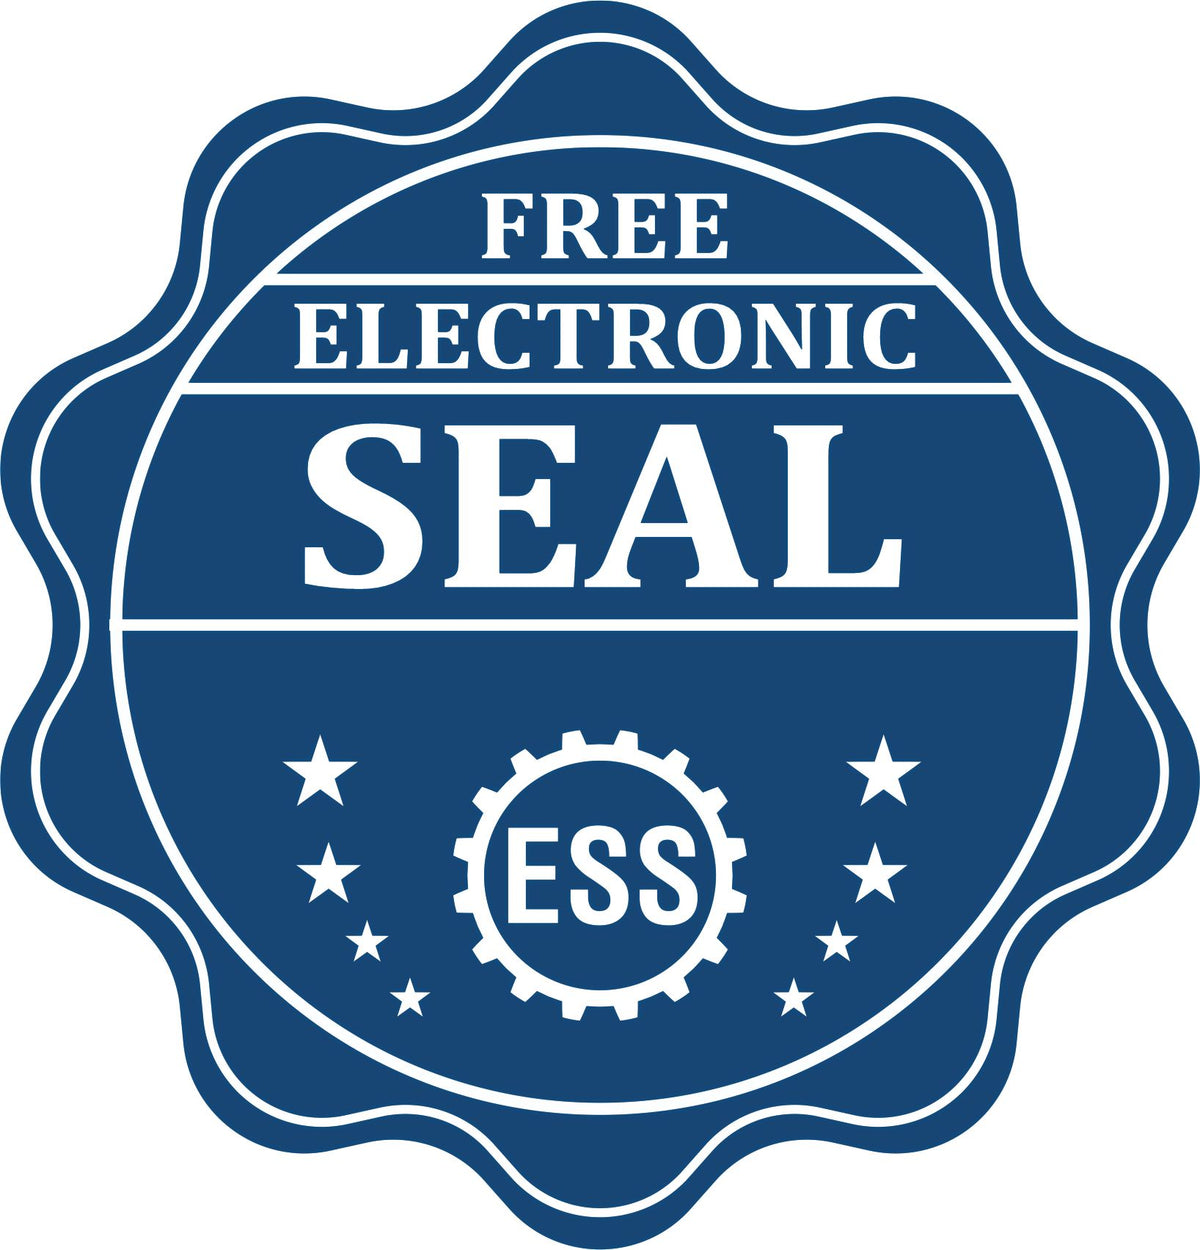 A badge showing a free electronic seal for the Extended Long Reach Arkansas Surveyor Embosser with stars and the ESS gear on the emblem.